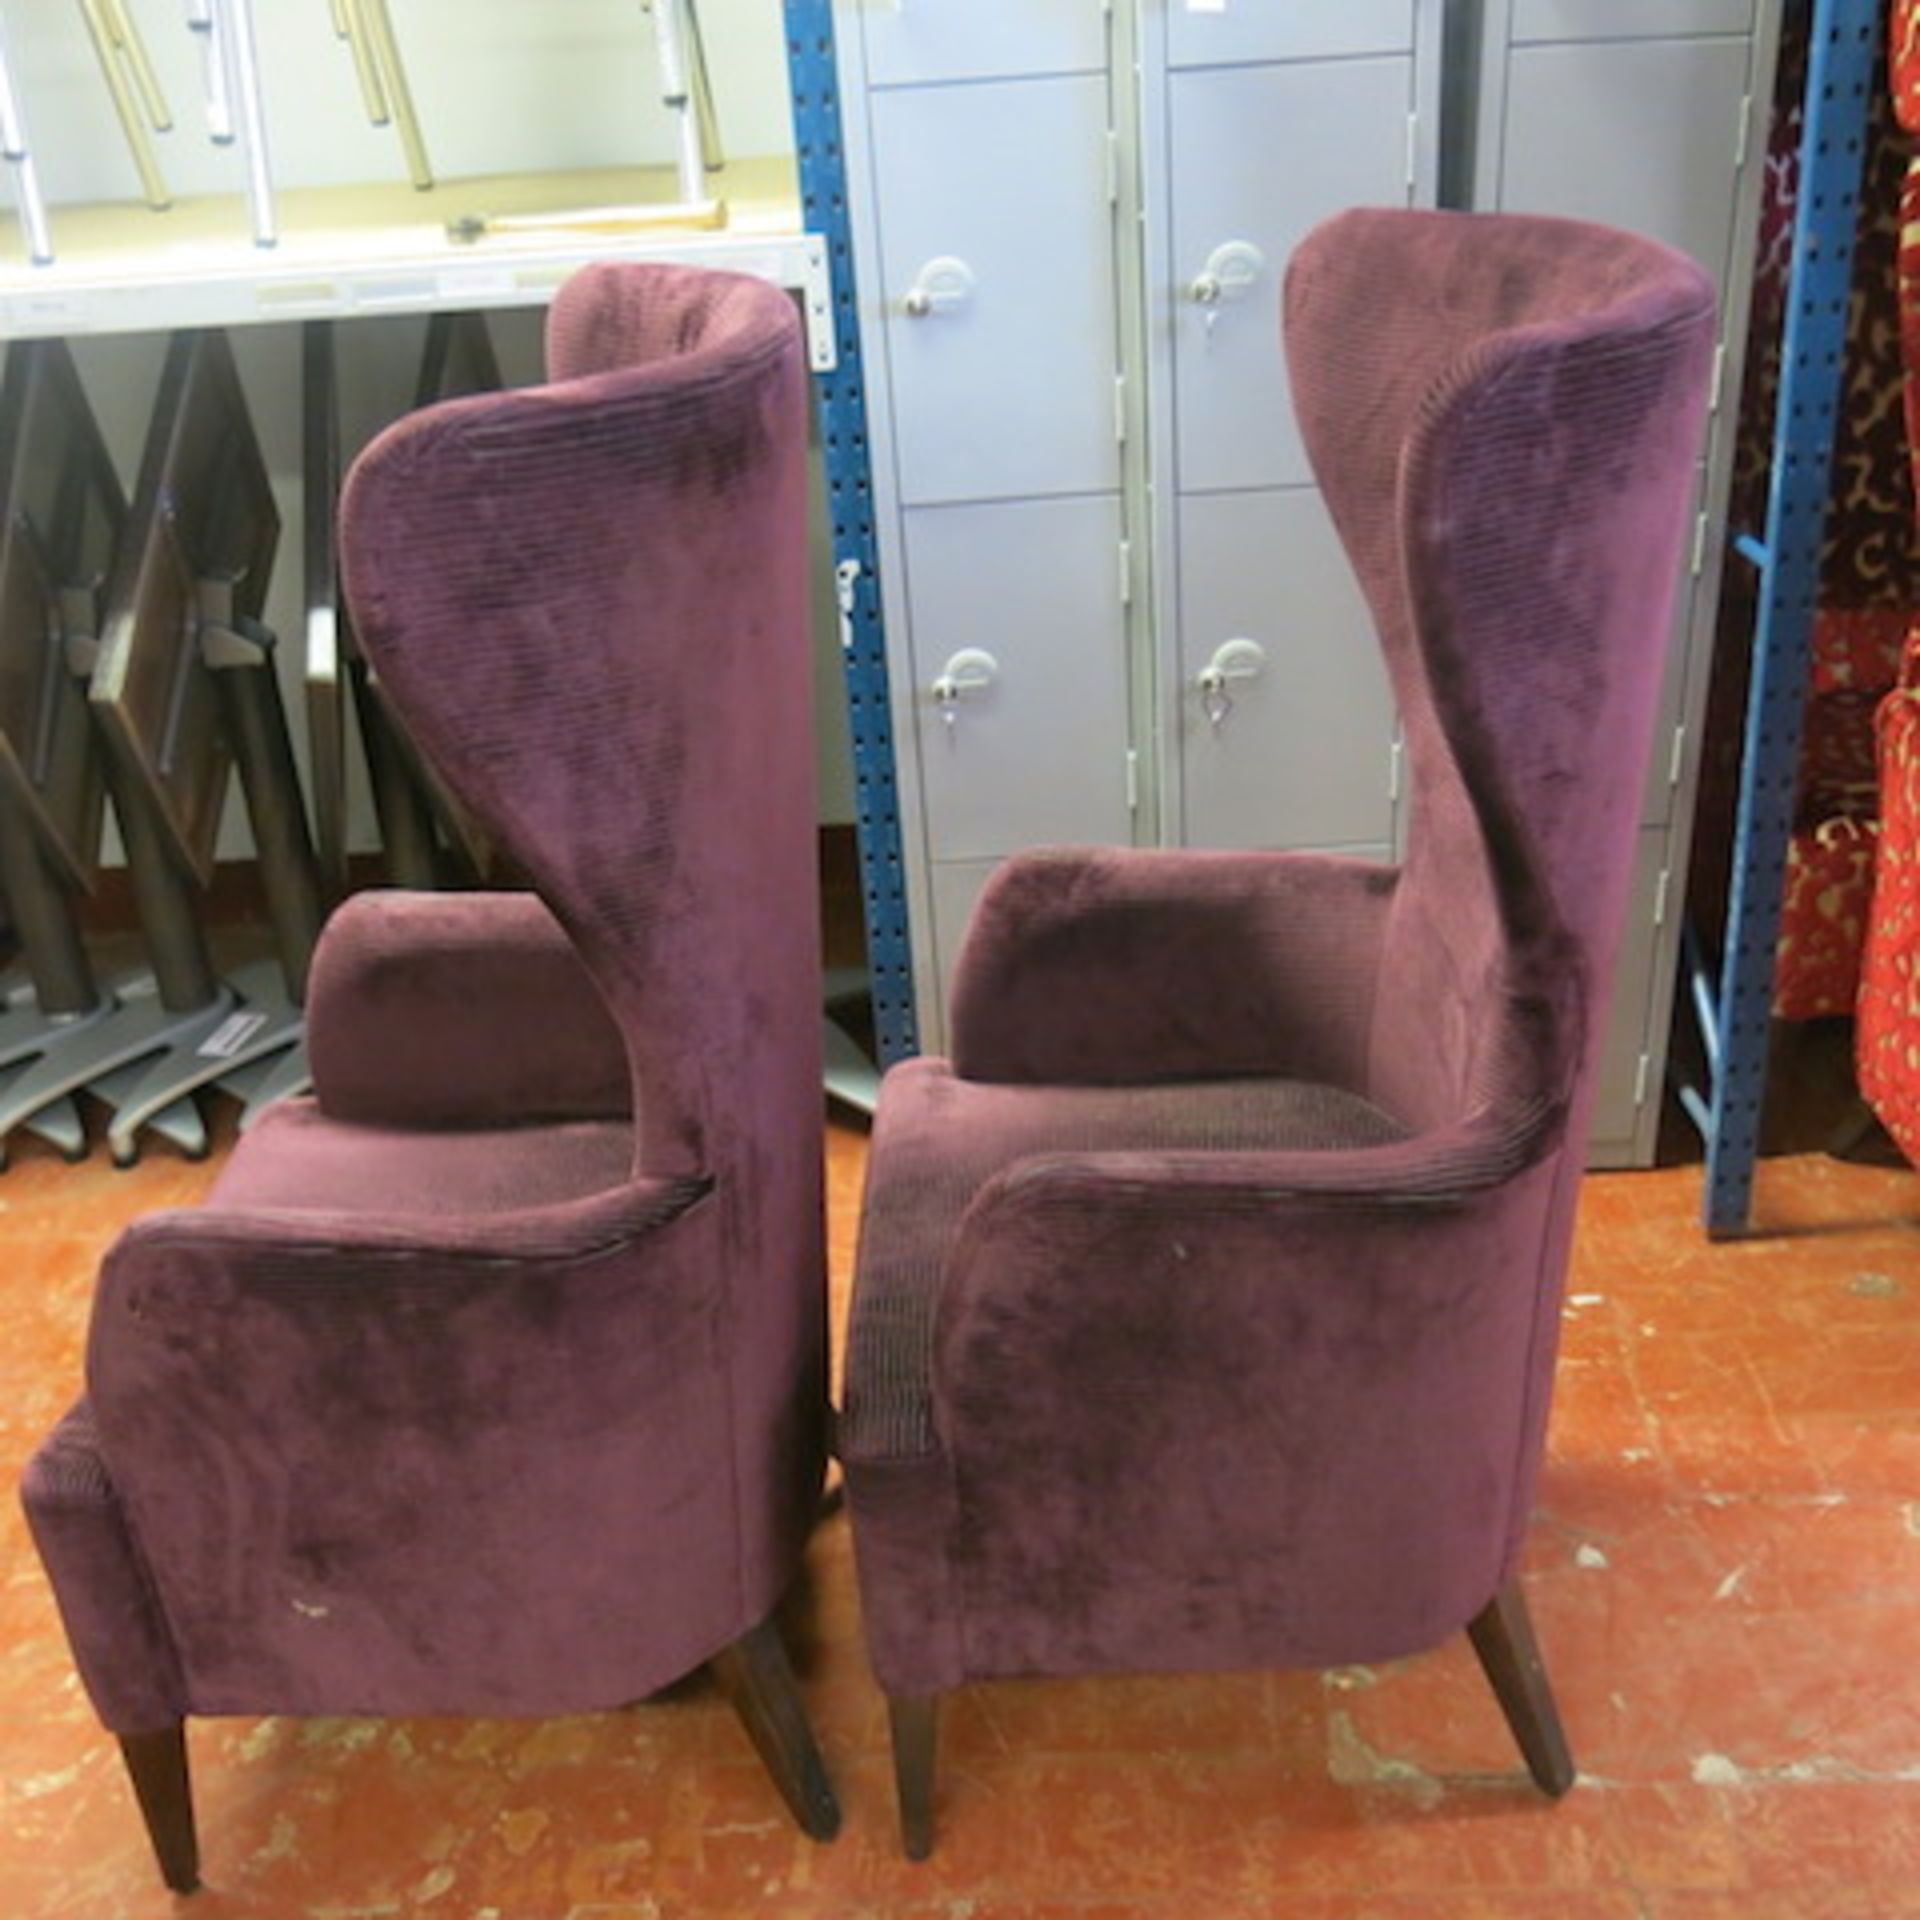 2 x Matching Crushed Velour Armchairs with Assorted Colour Striped Pattern and Plain Seat, Appears - Image 3 of 6